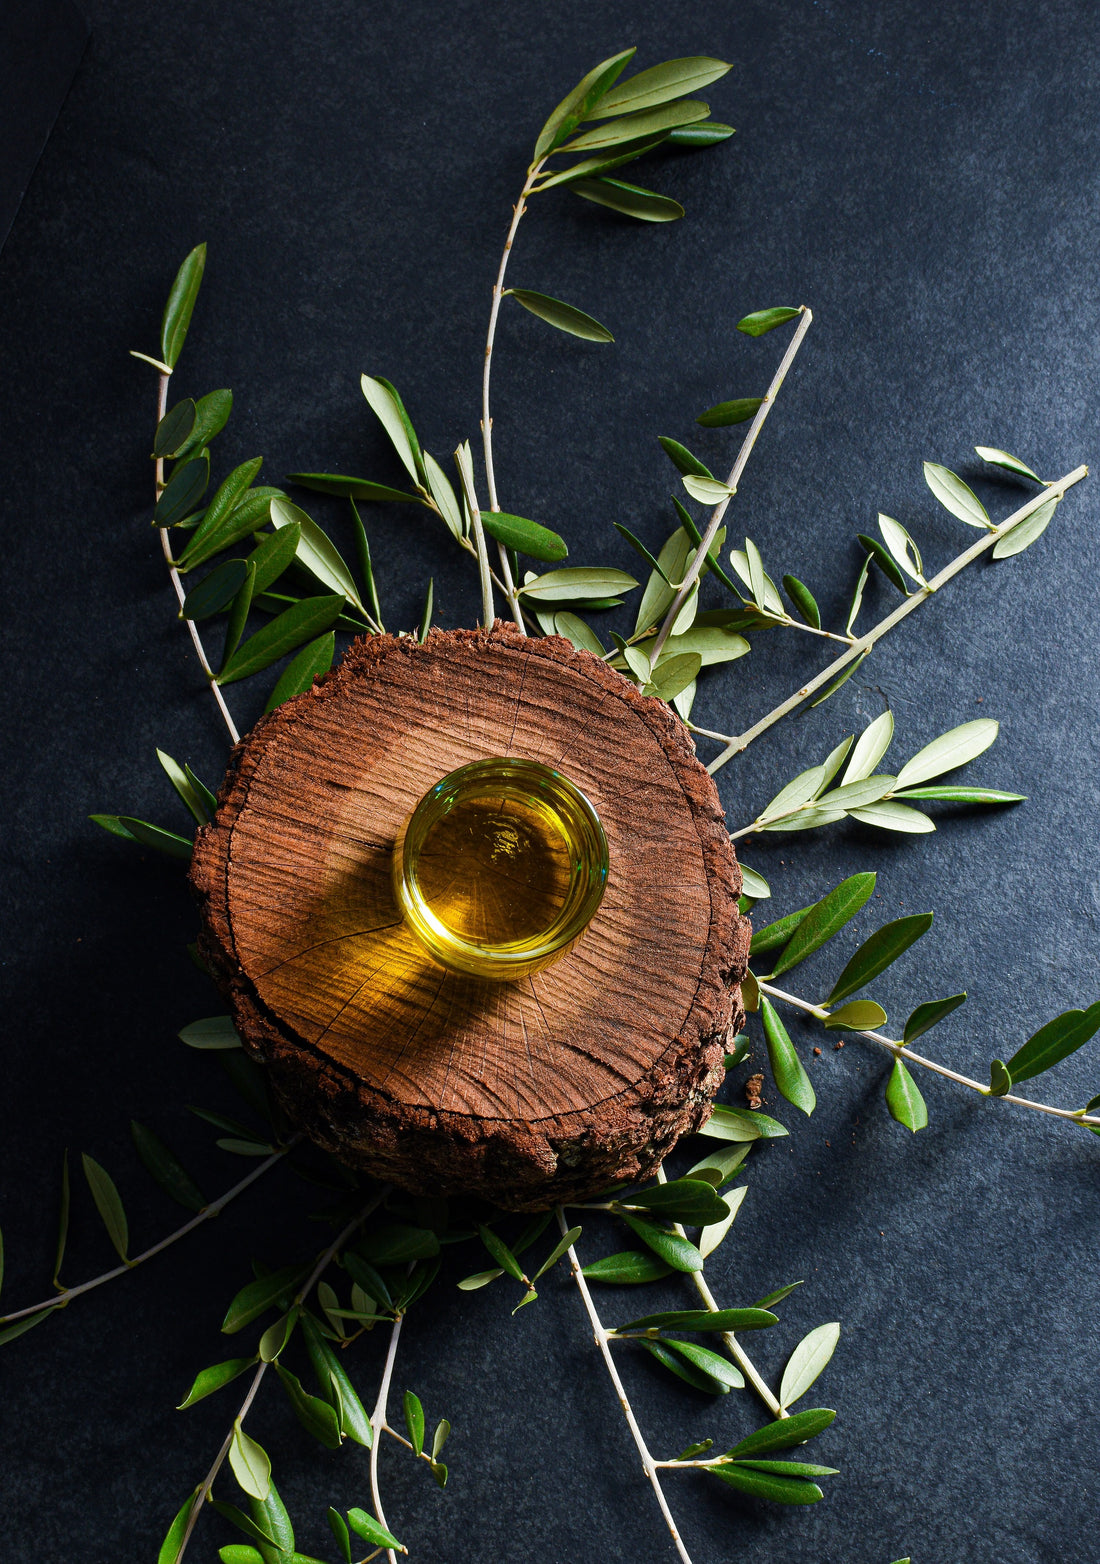 Should We All Be Drinking Olive Oil?